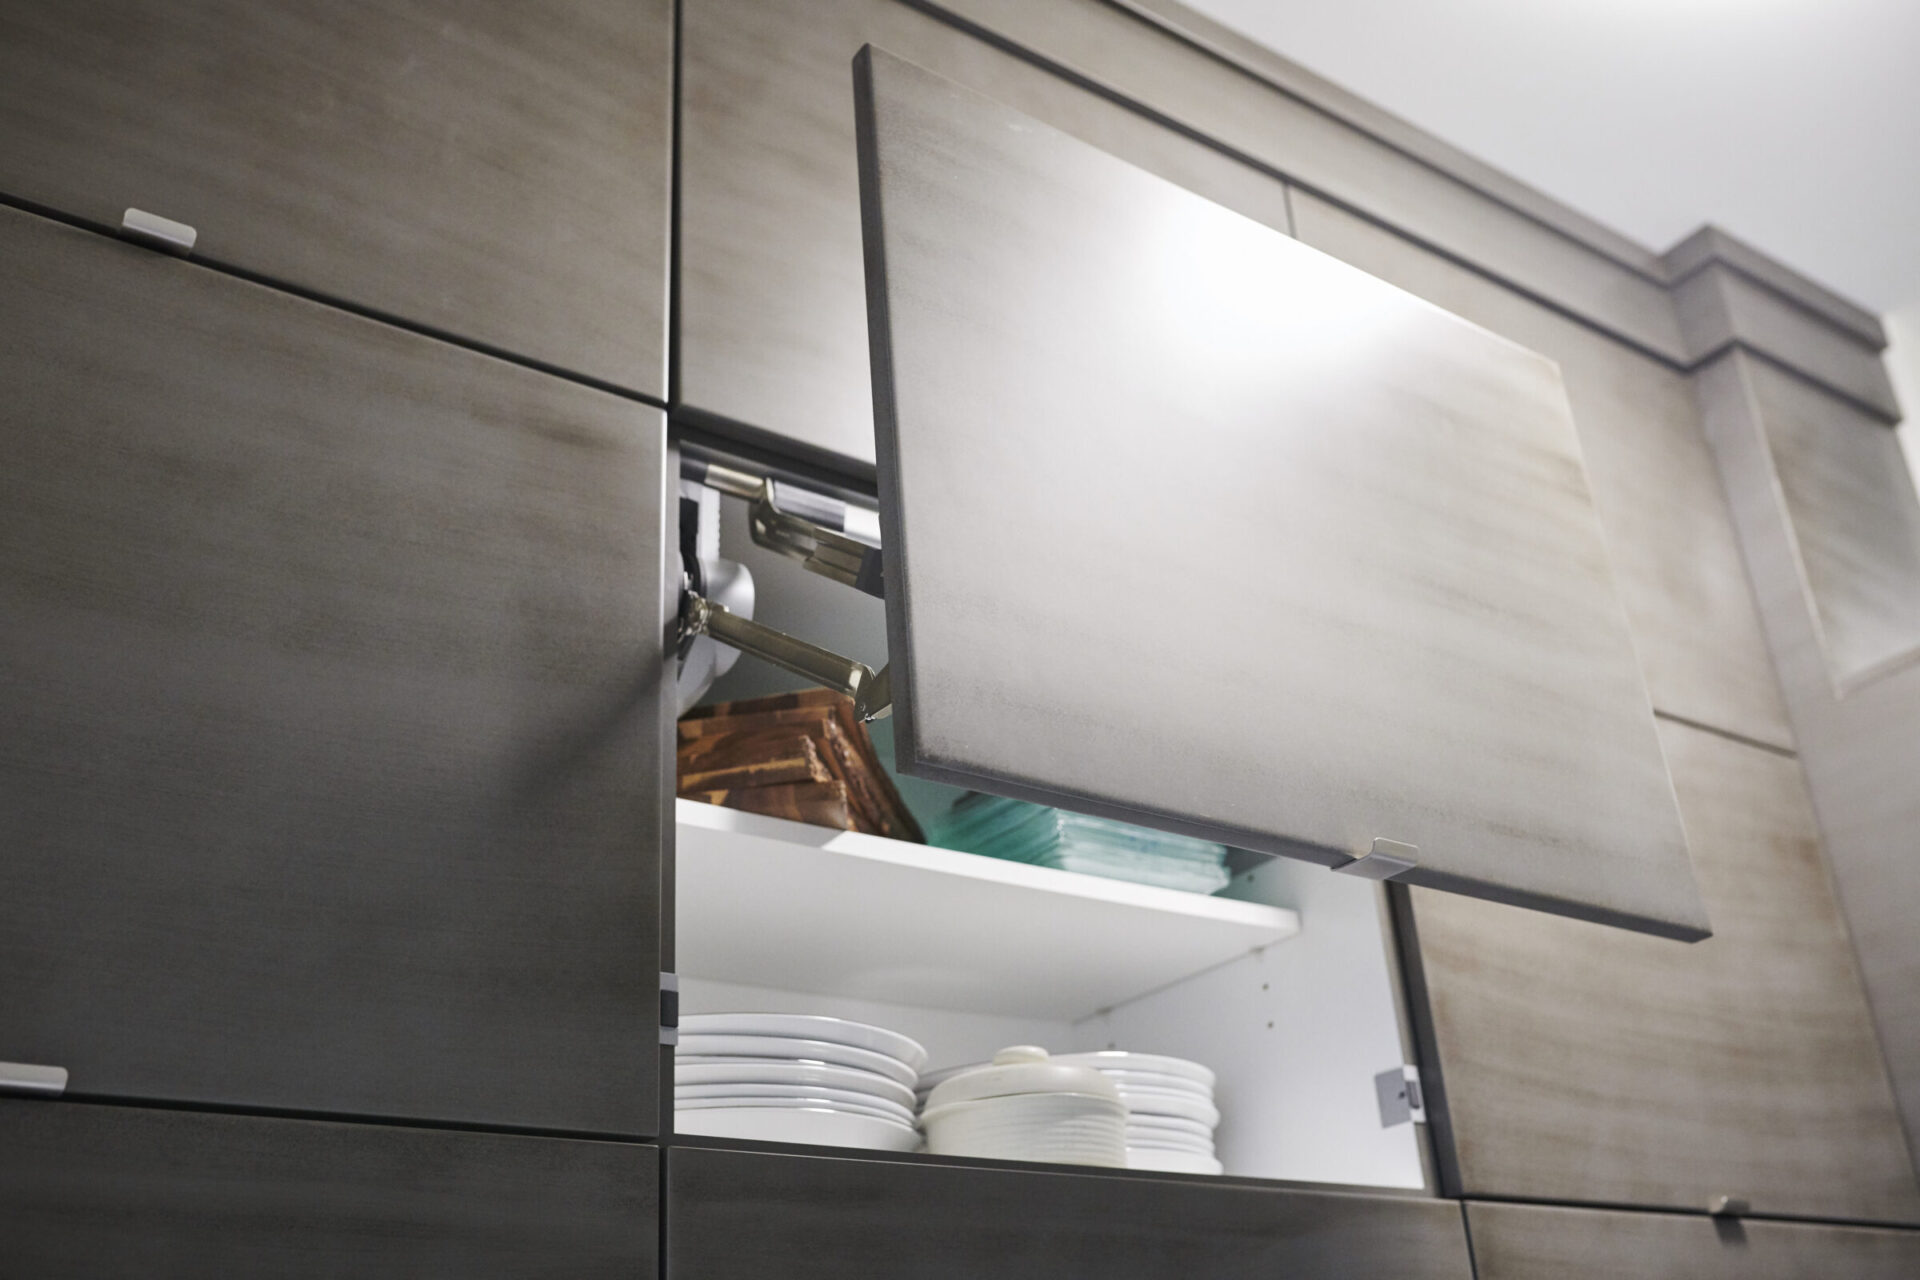 This image shows a modern kitchen cabinet with a lift-up door mechanism revealing stacked white dishes and bowls inside. The design is sleek and contemporary.